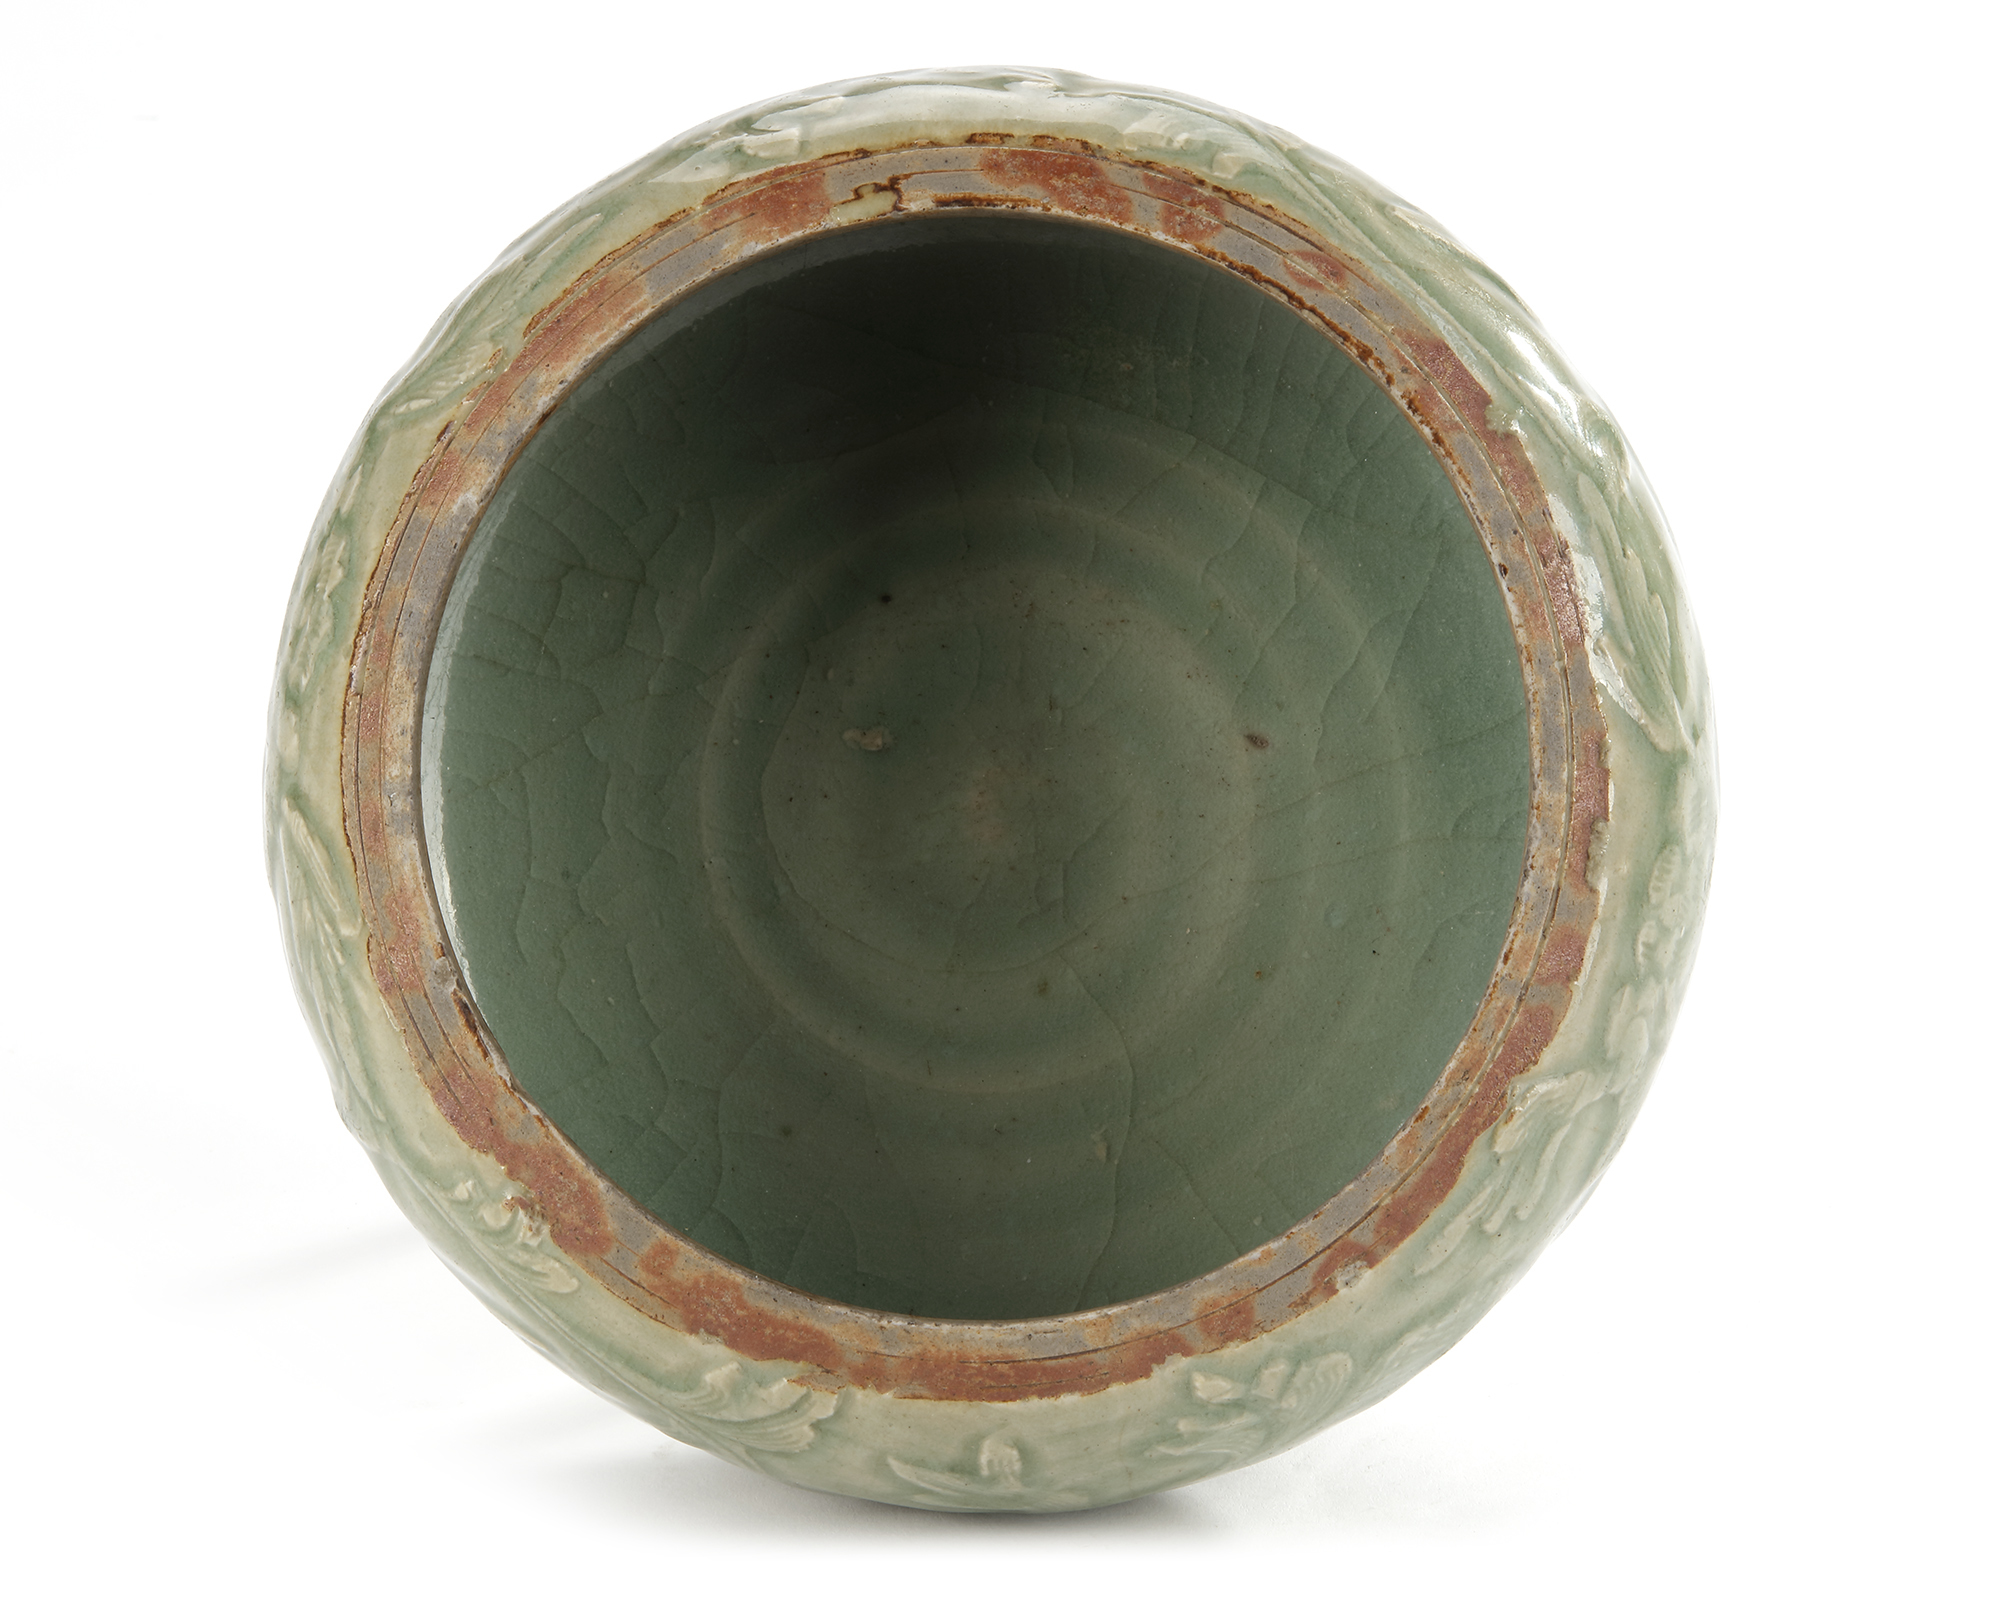 A CHINESE LONGQUAN CELADON BOWL, MING DYNASTY, 15TH CENTURY - Image 3 of 4